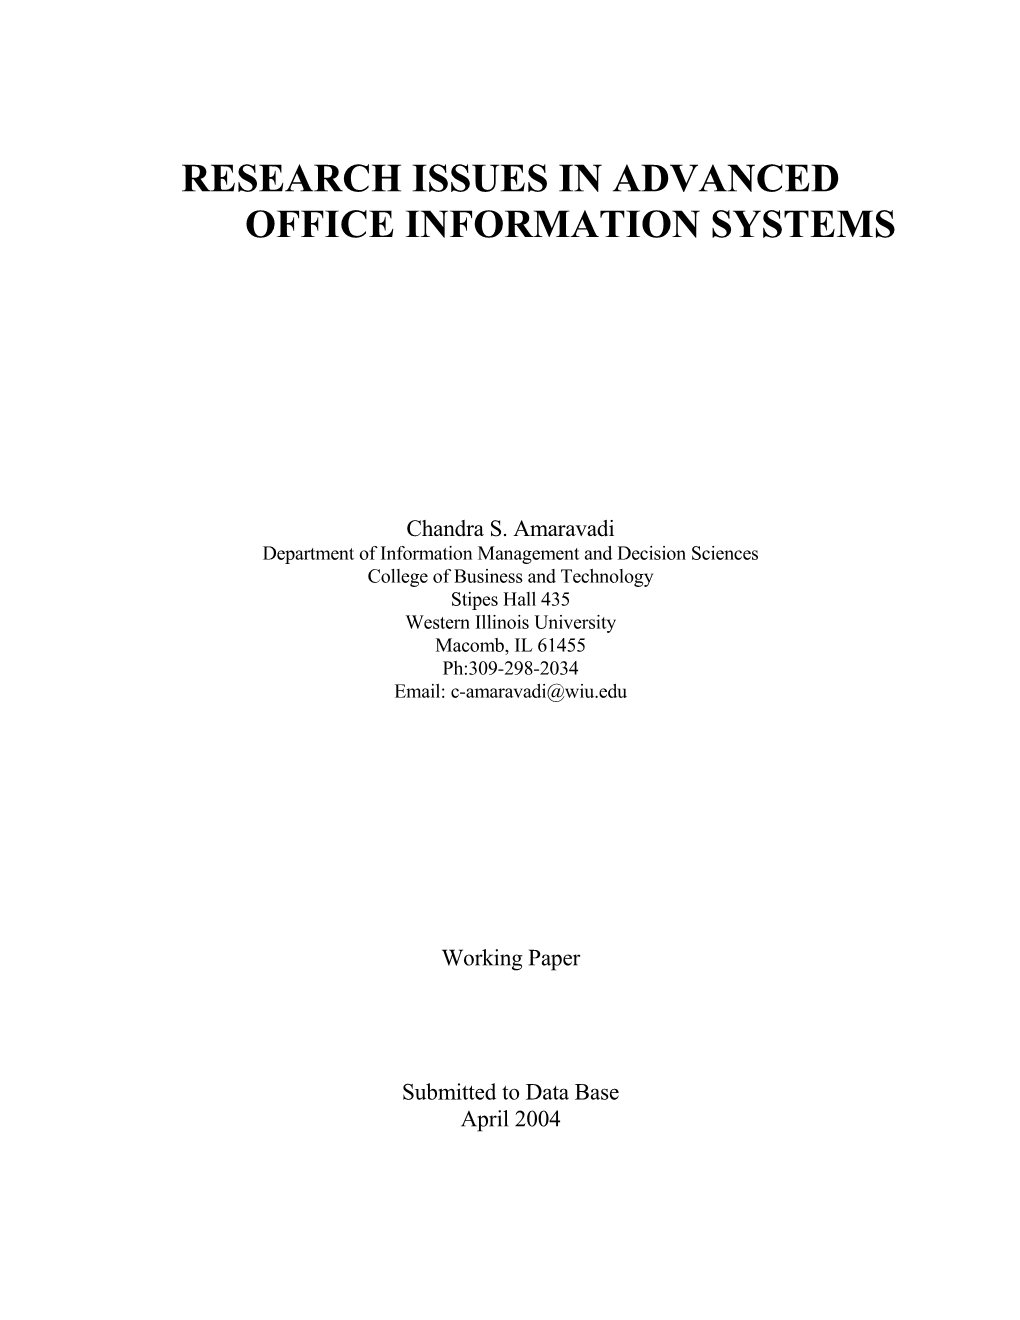 Research Issues in Advanced Office Information Systems